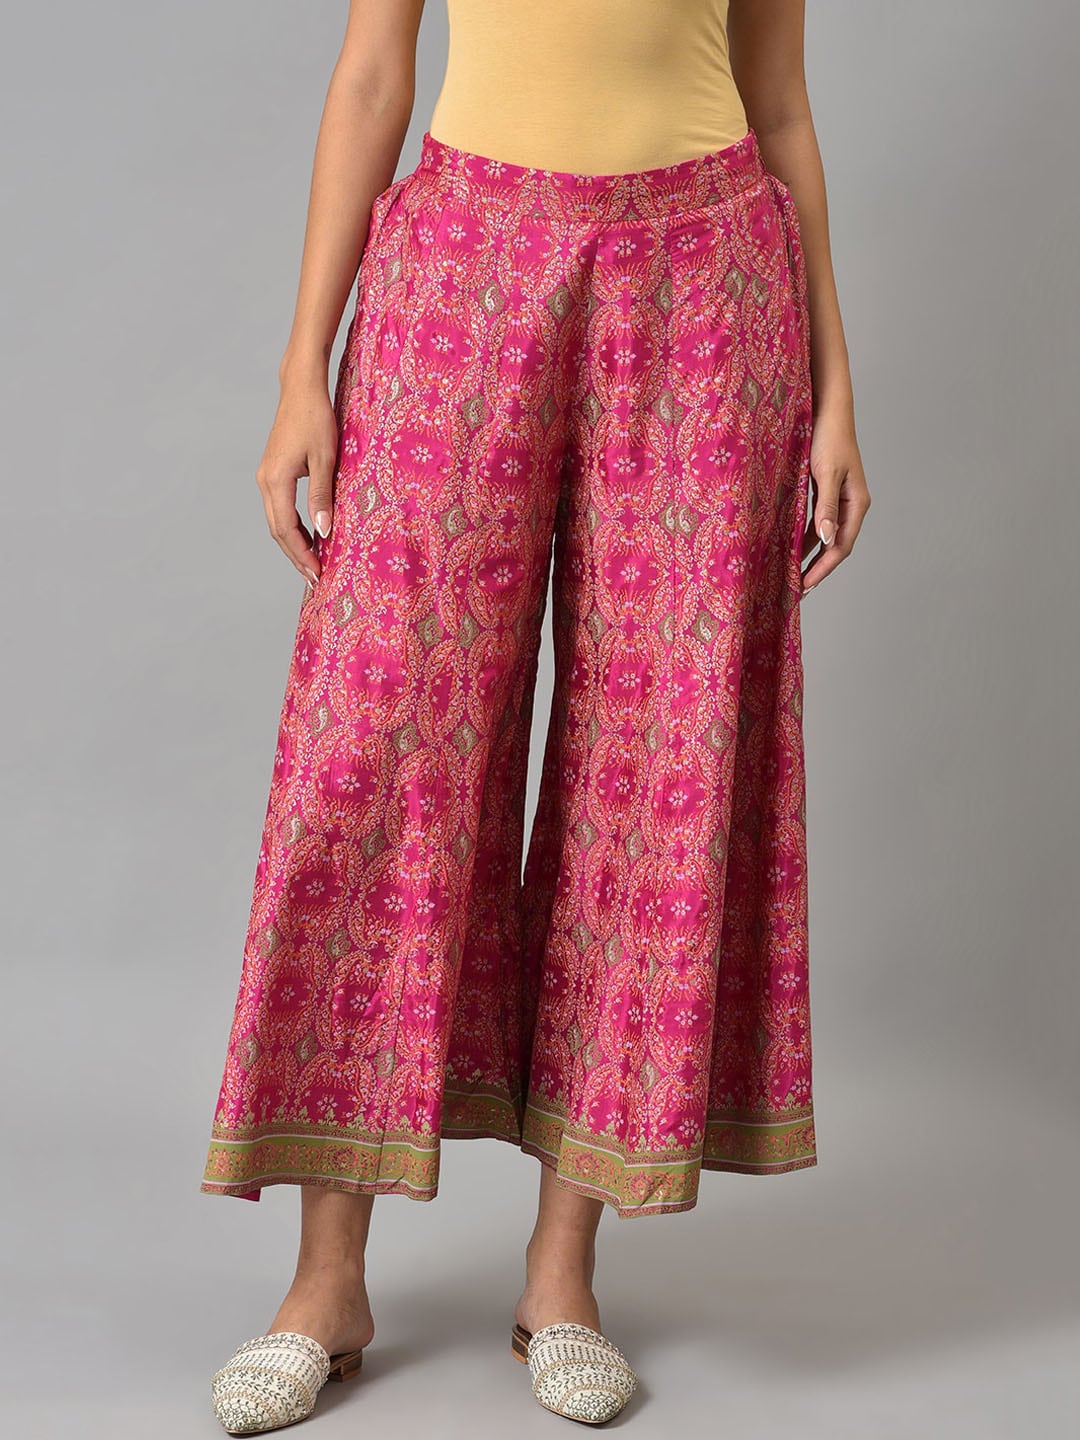 W Women Berry Pink Floral Printed Maxi Skirts Price in India